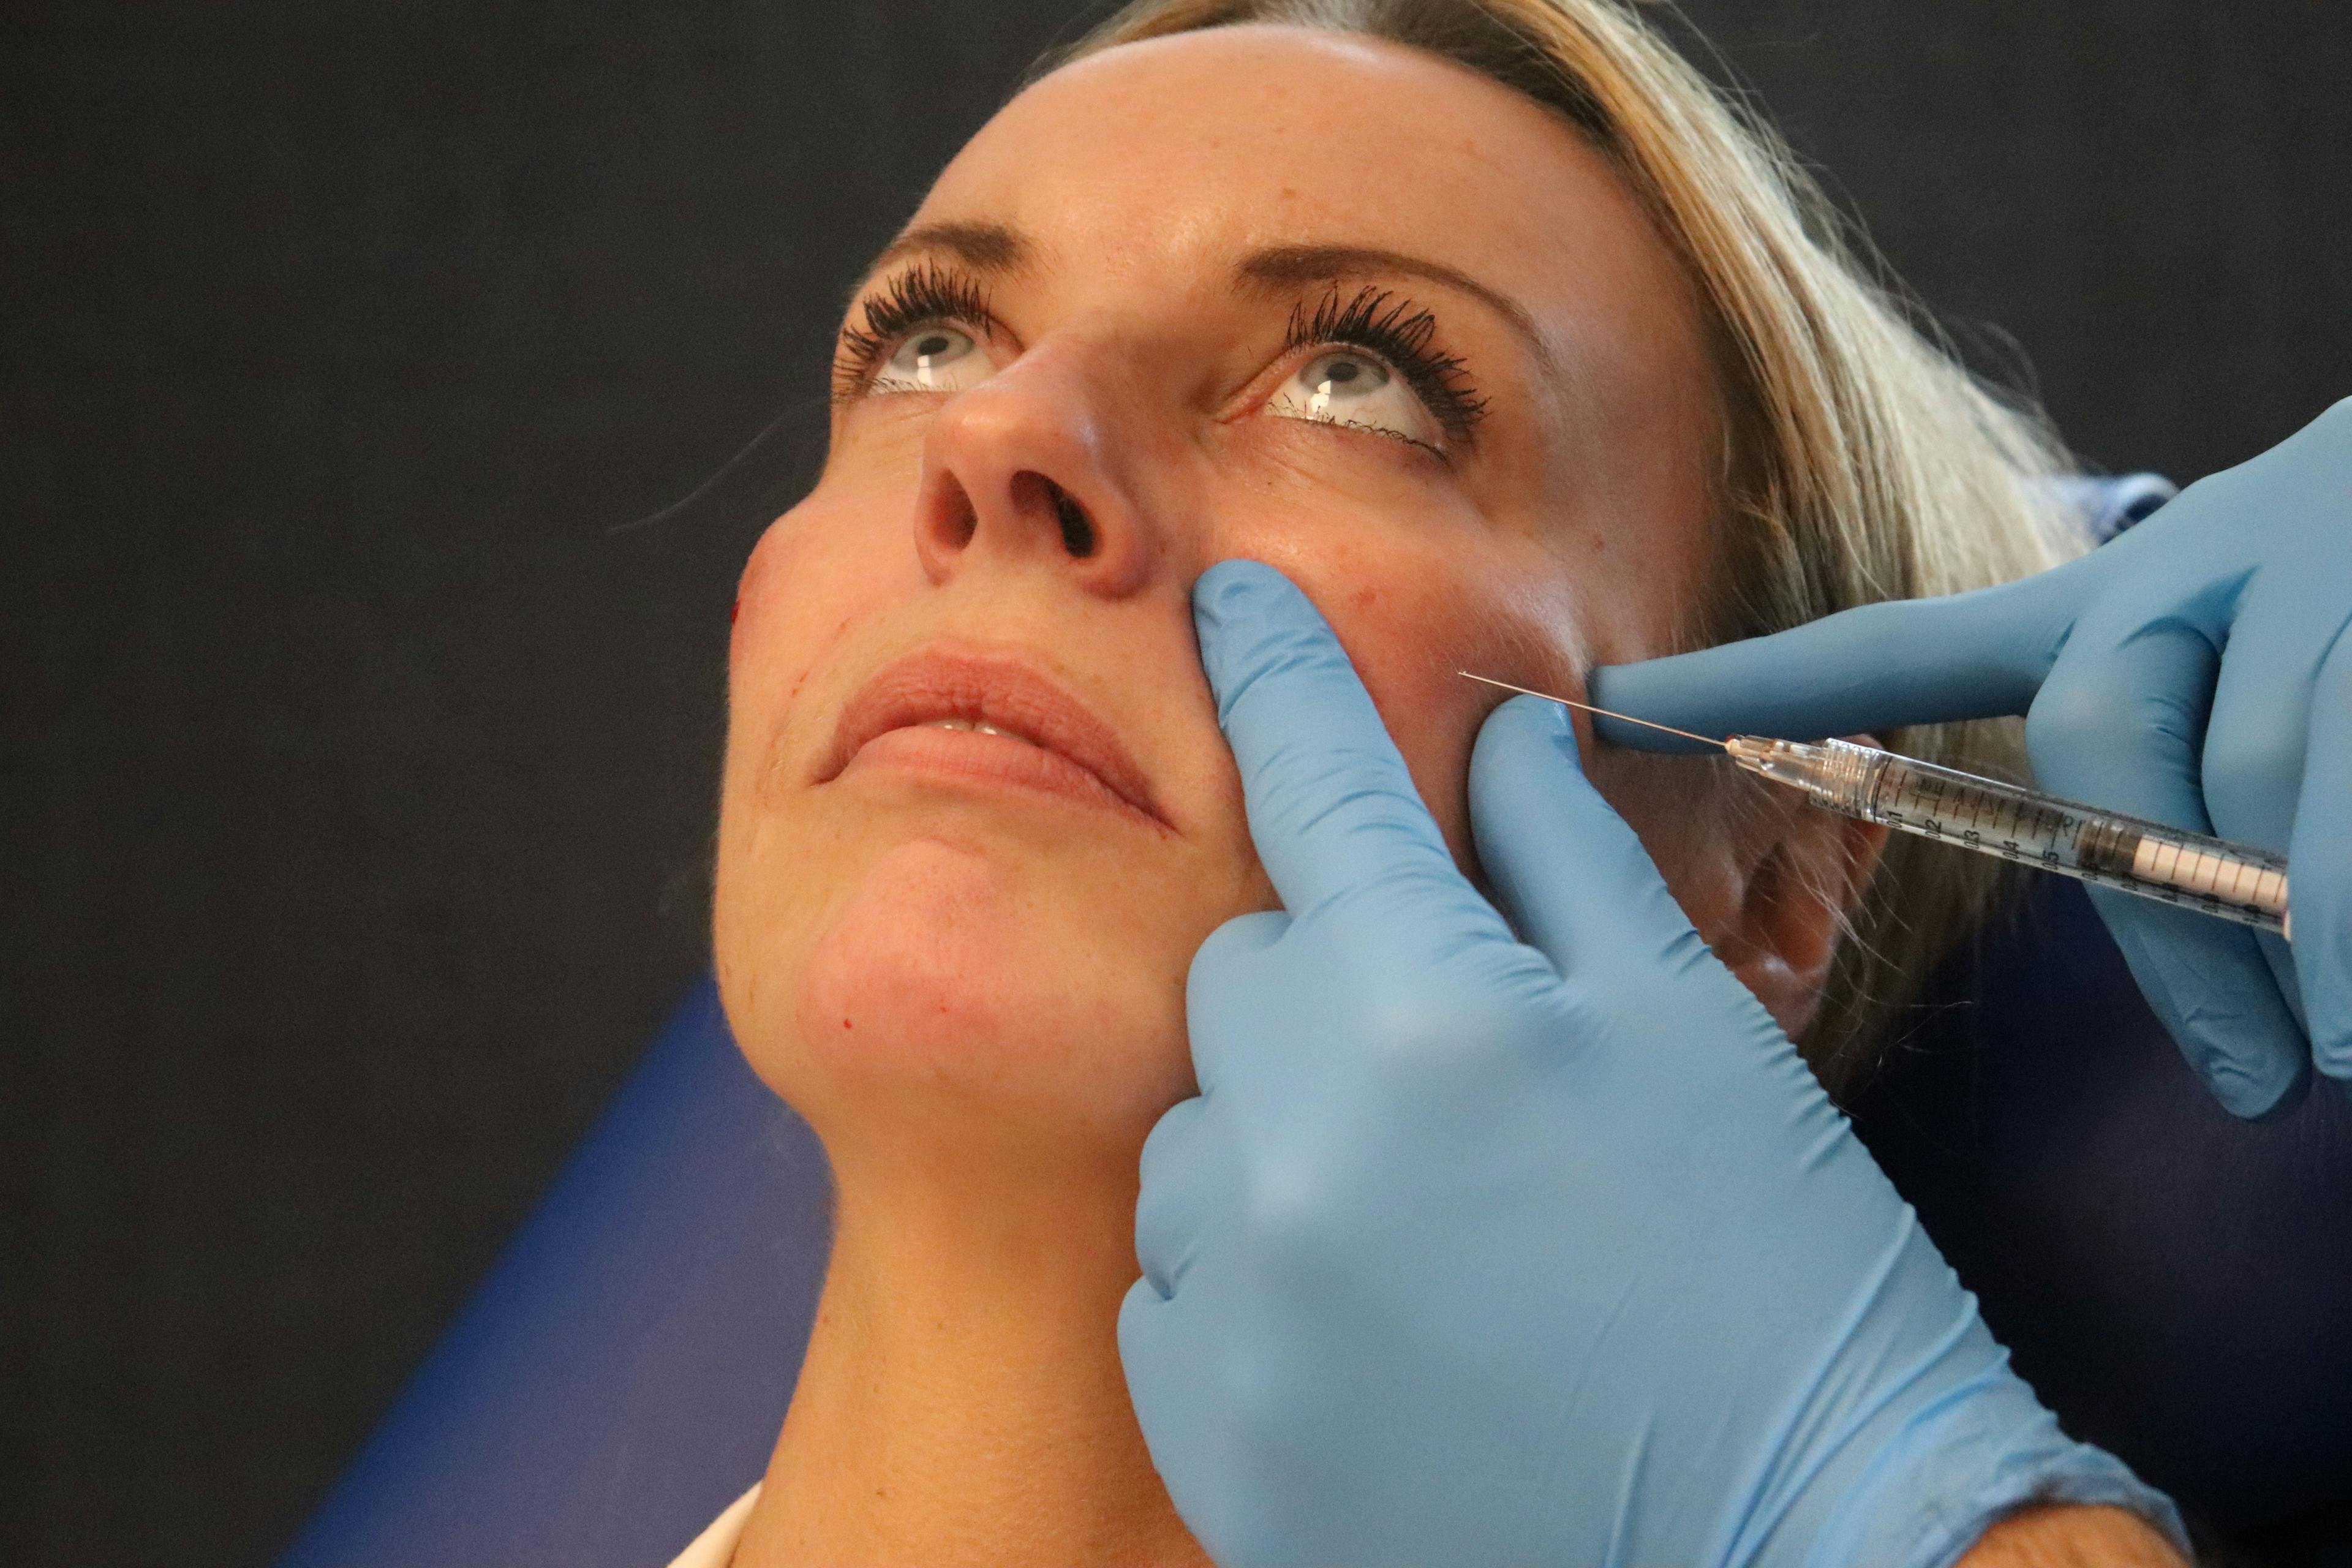 Cheek filler demonstration during a Level 7 Diploma in Botox & Dermal Fillers Observation Day at Harley Academy